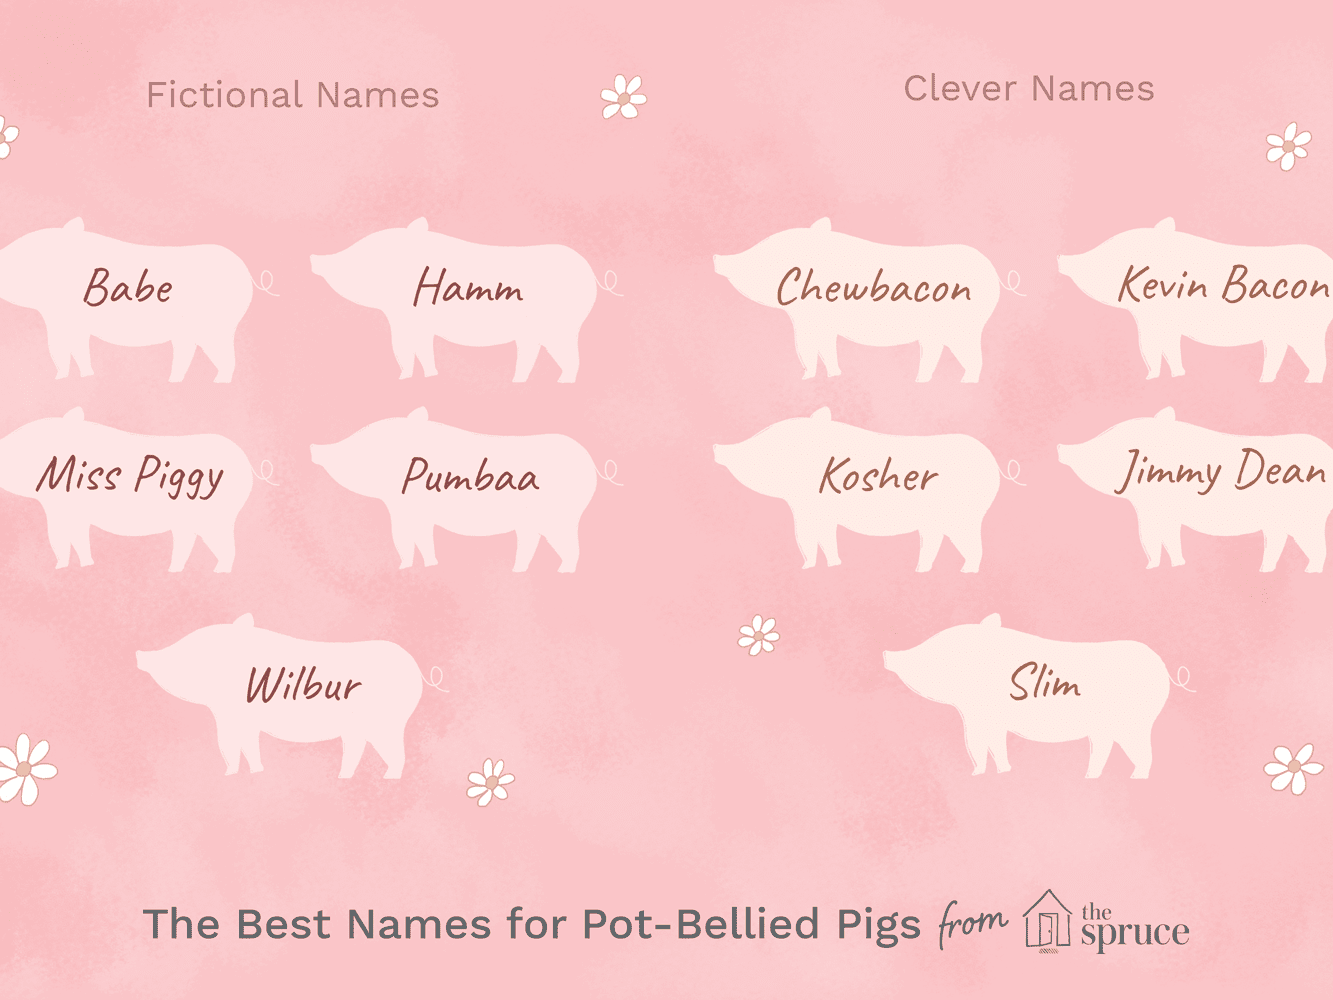 What is another name for a baby pig?